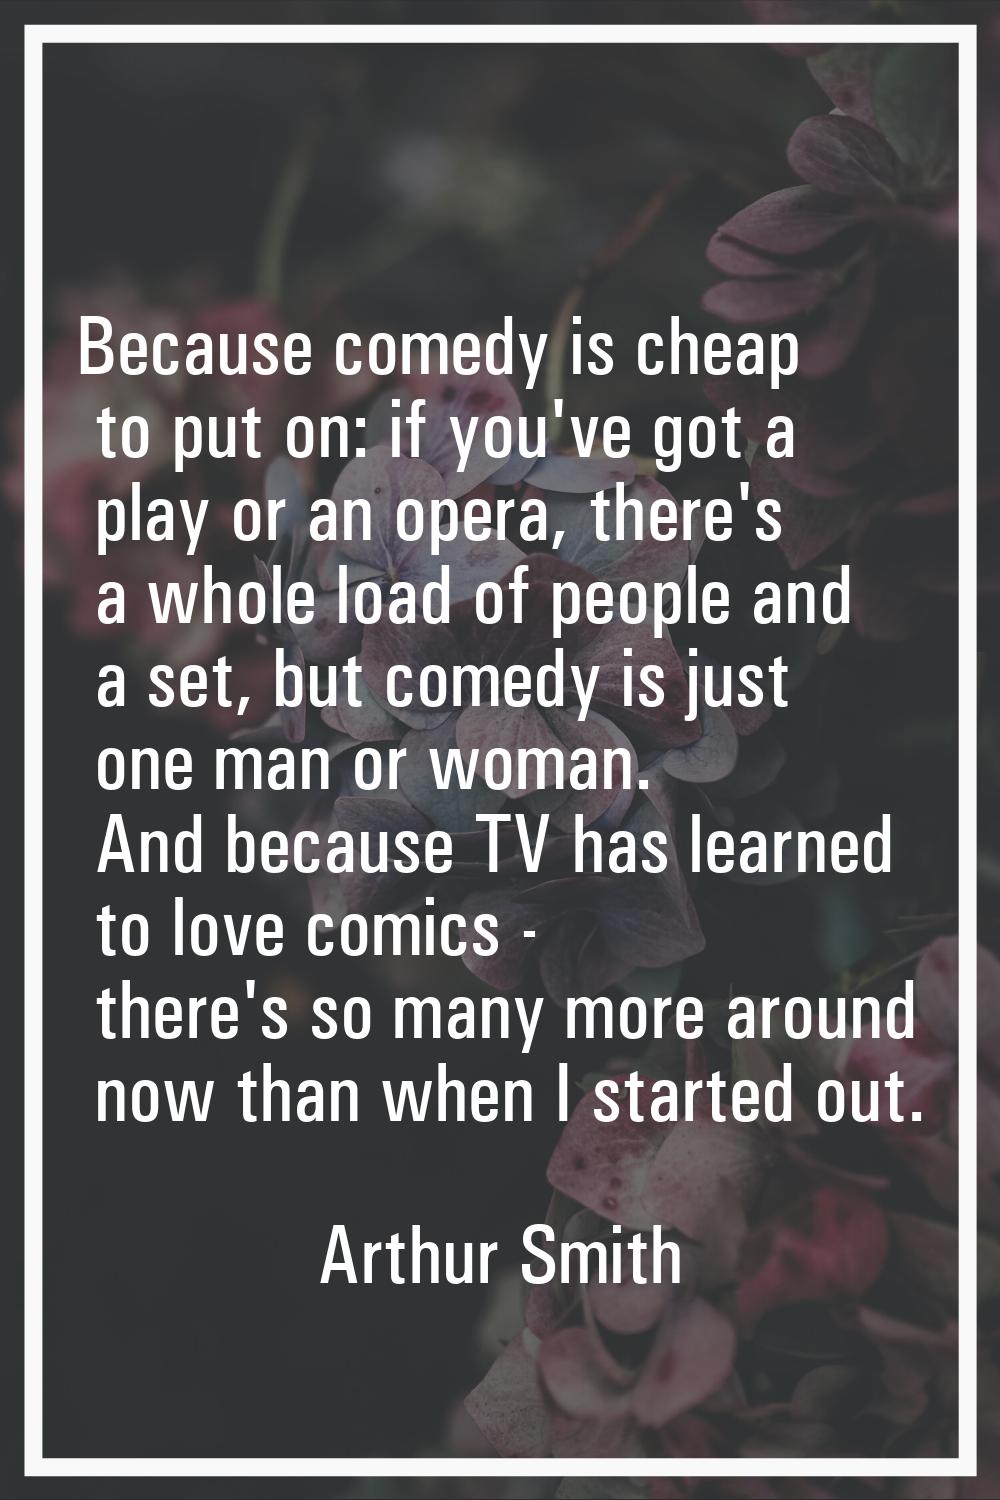 Because comedy is cheap to put on: if you've got a play or an opera, there's a whole load of people